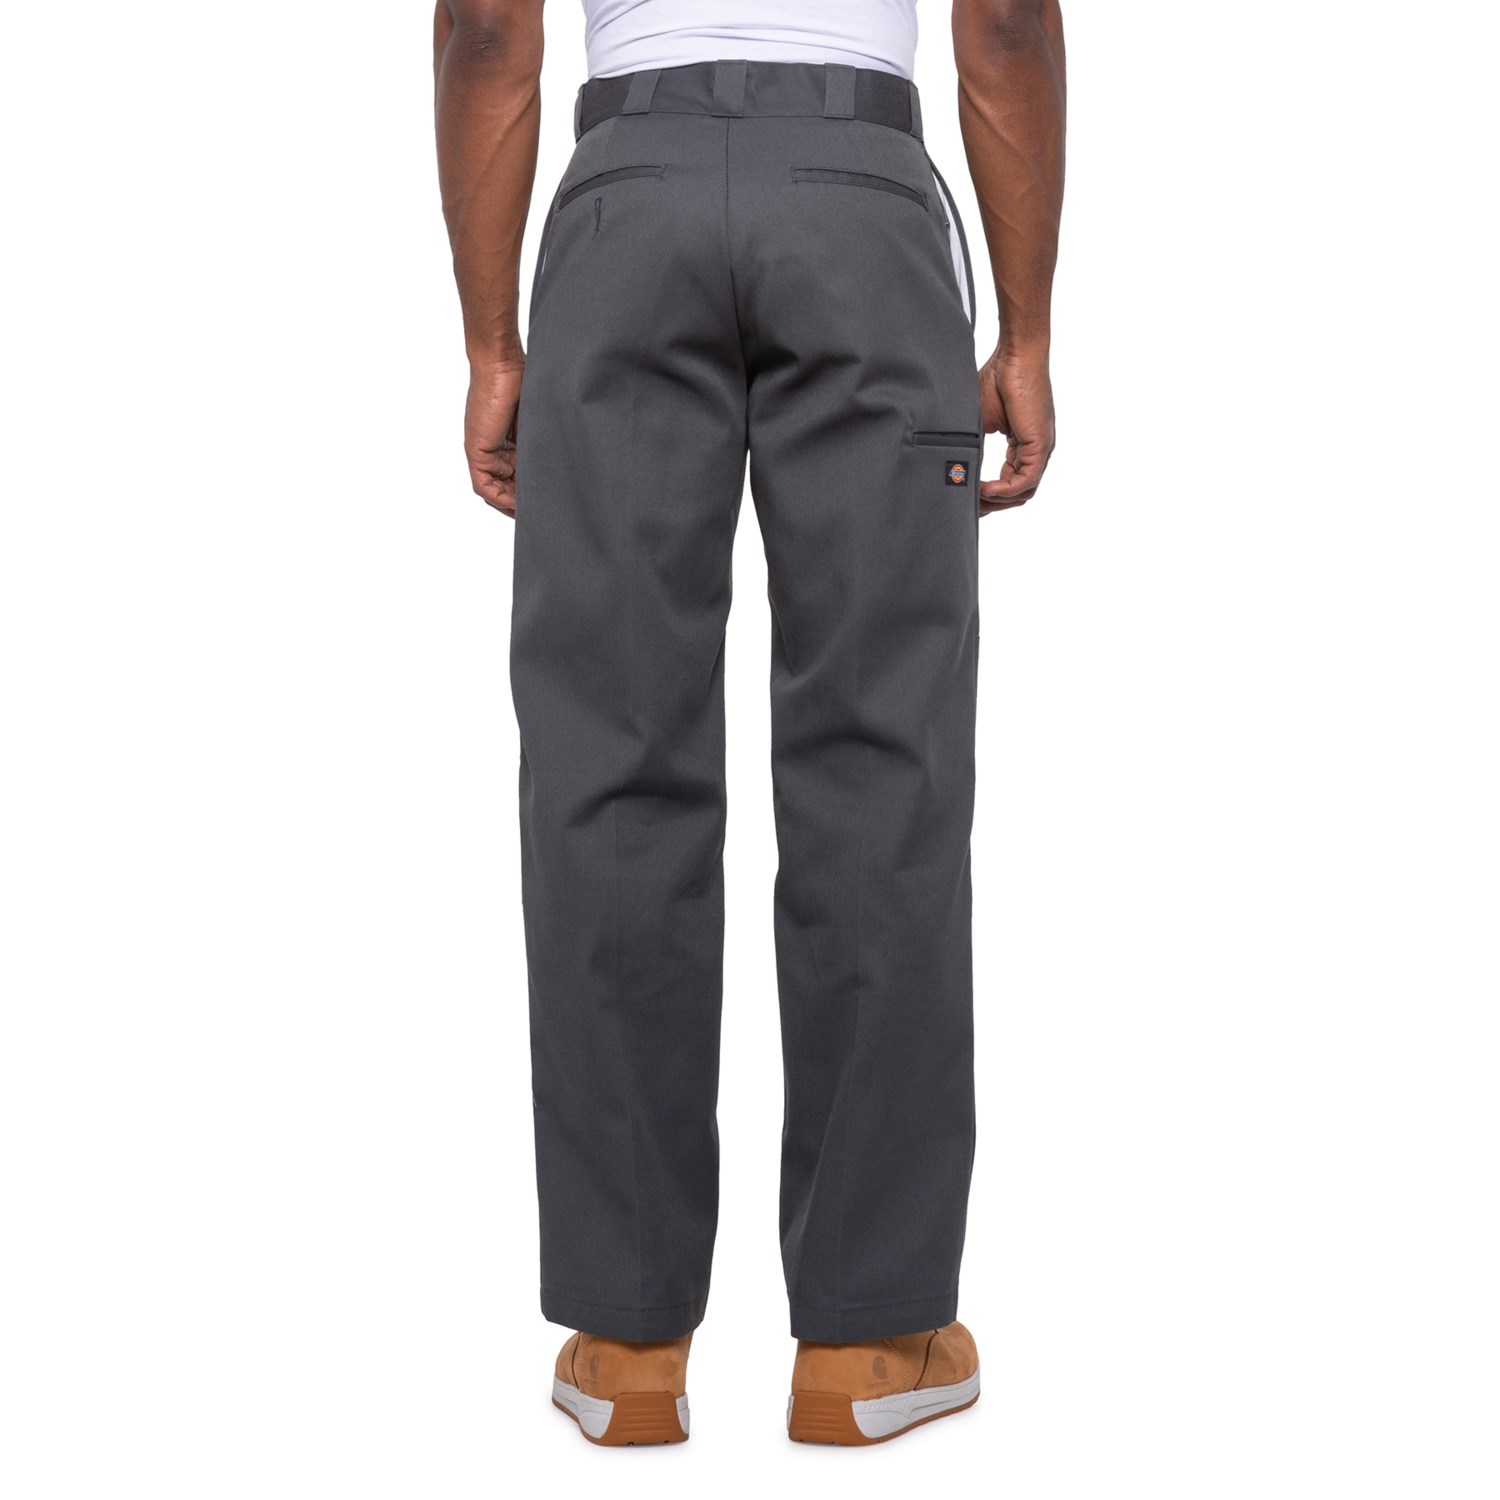 Dickies Double-Knee Twill Work Pants (For Men) - Save 42%